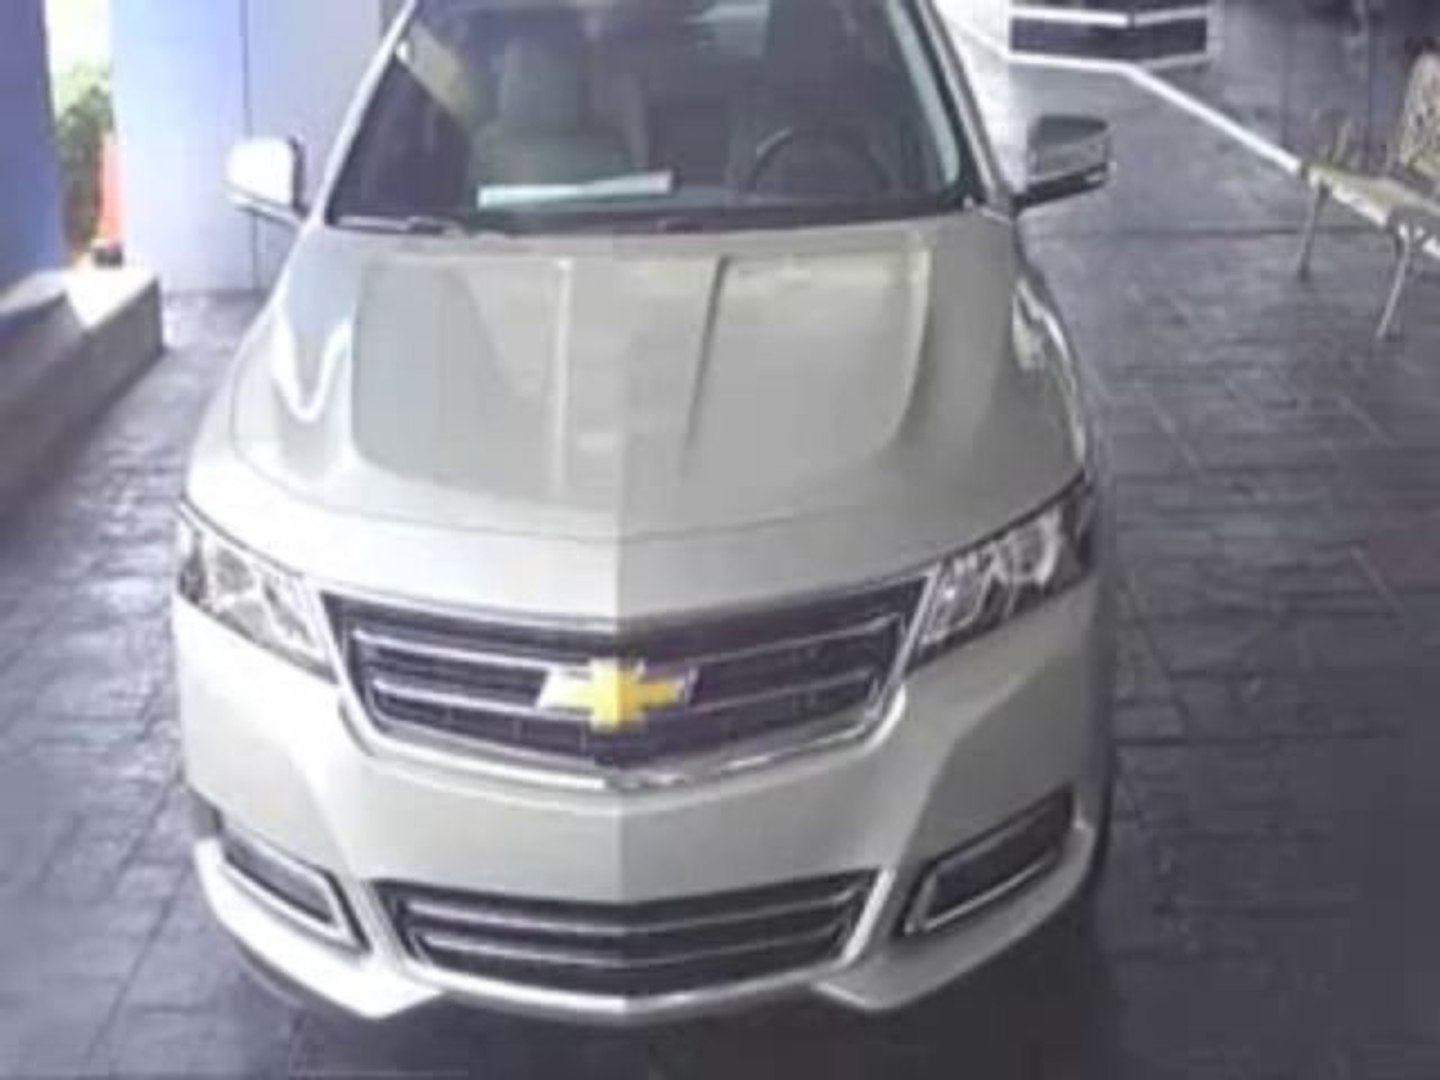 ⁣Chevy Impala Dealer Clearwater, FL | Chevrolet Impala Dealership Clearwater, FL